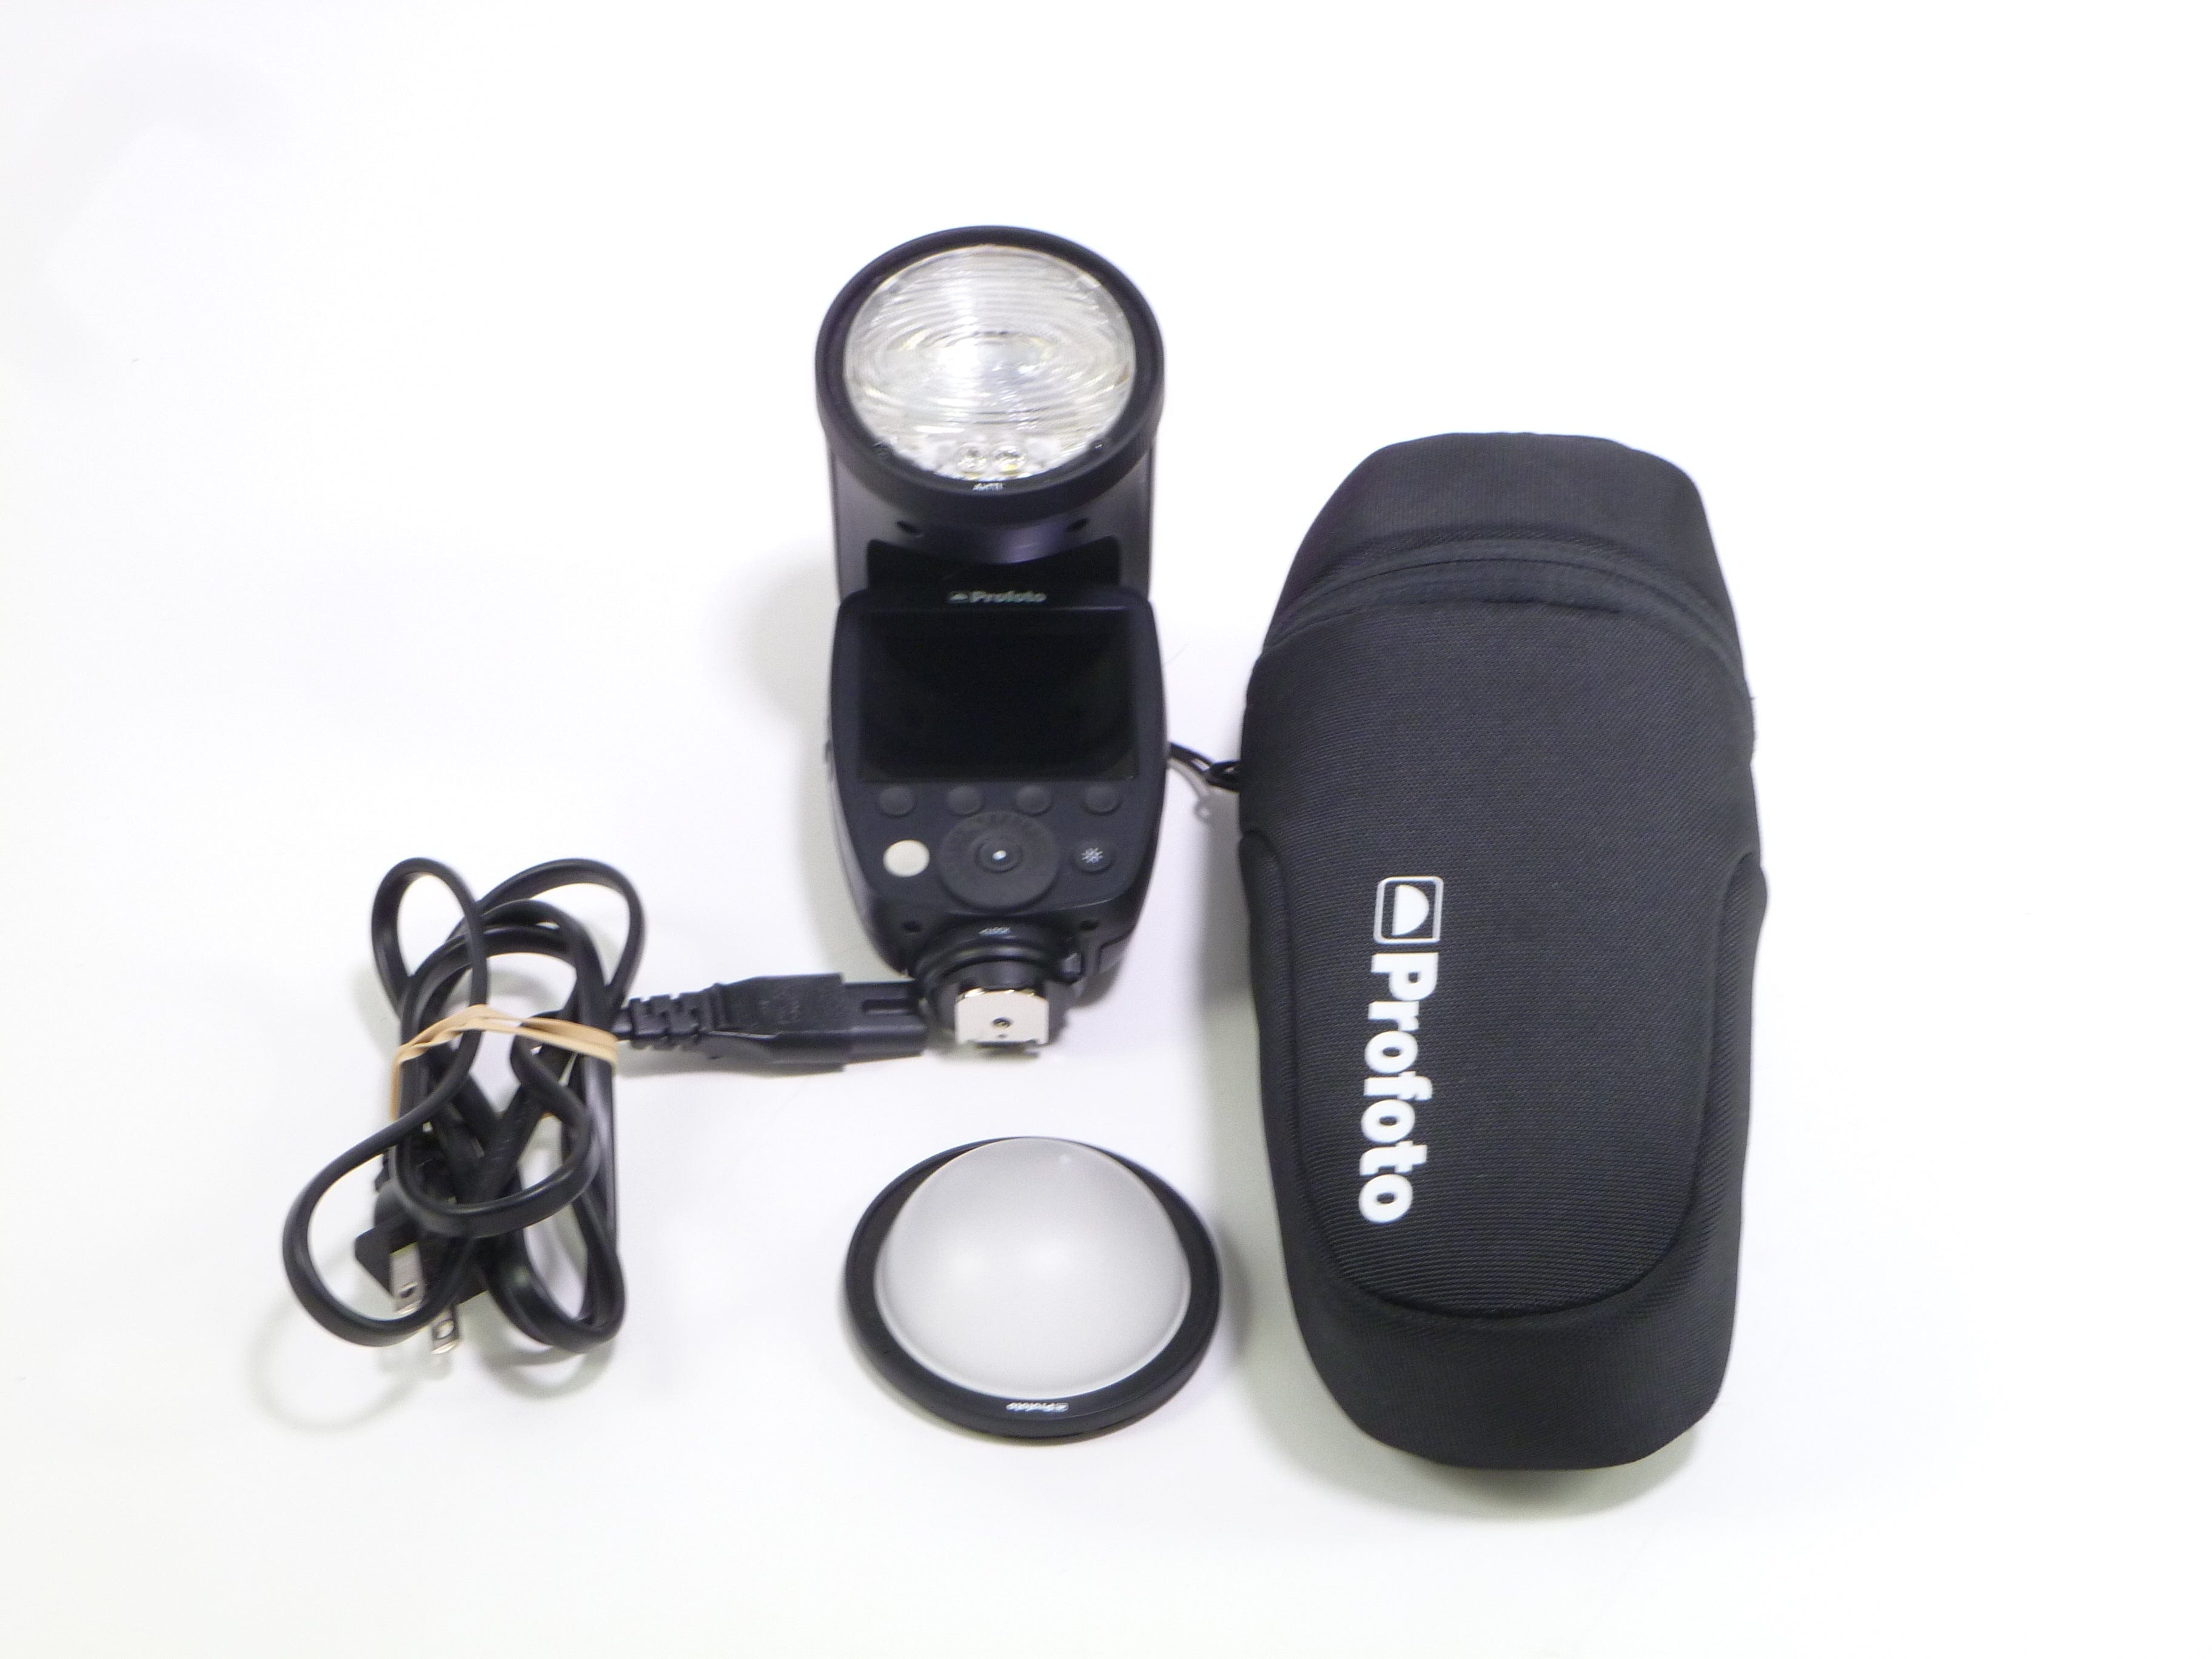 Profoto A1X for Sony AS IS / PARTS ONLY Drop Damage